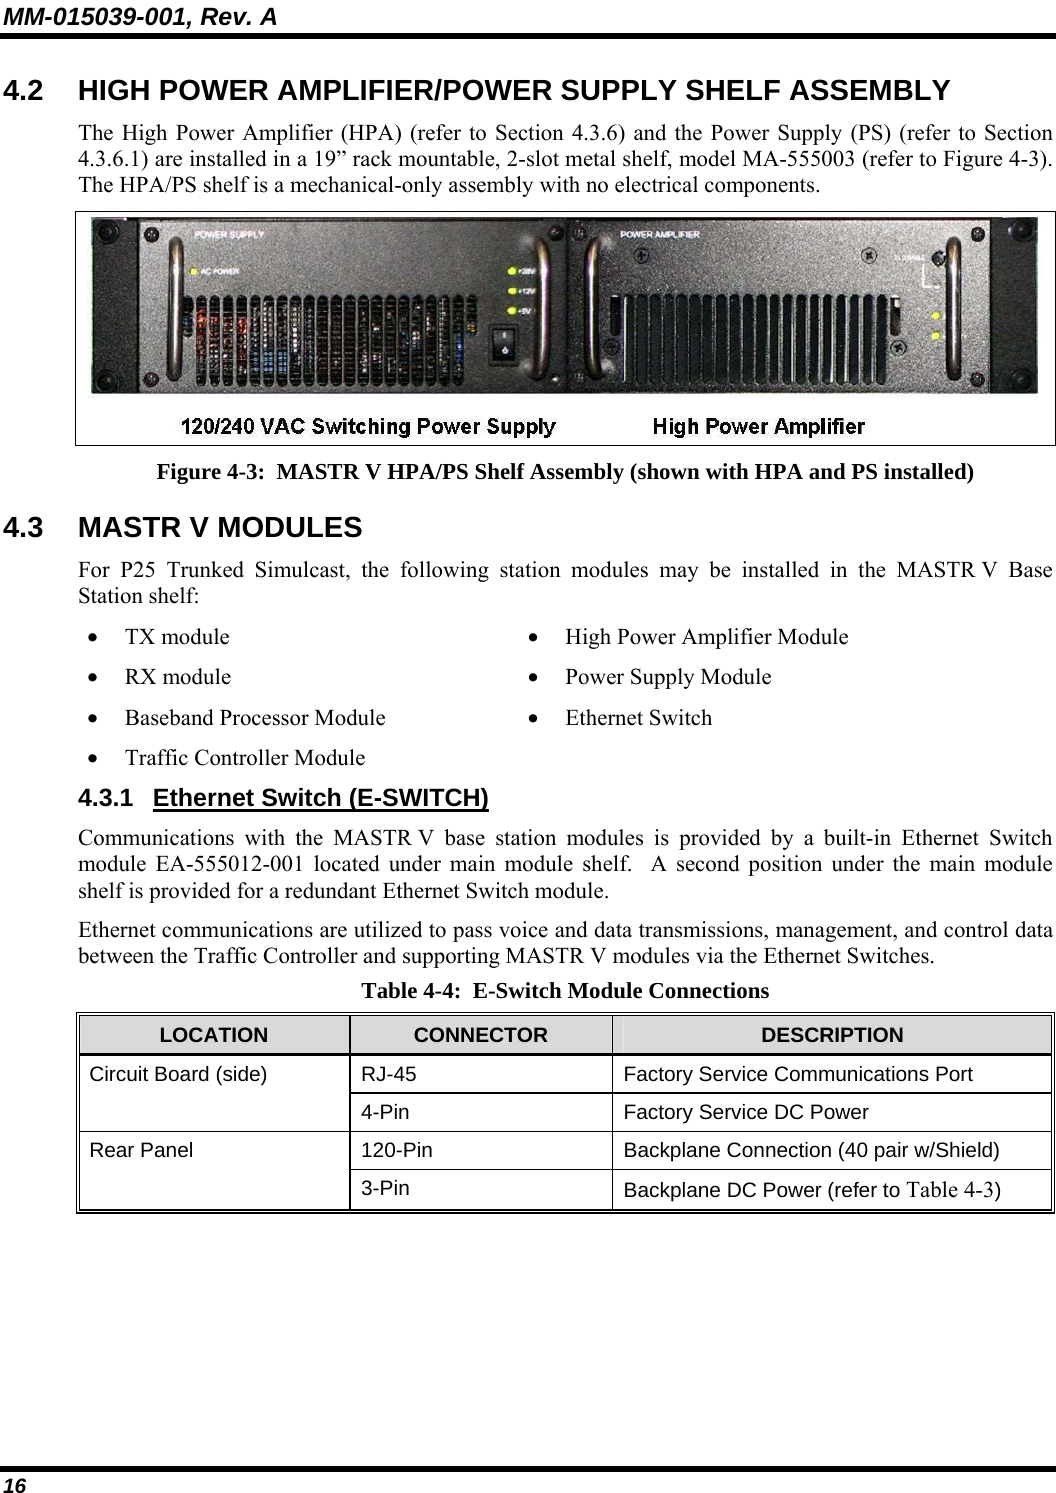 MM-015039-001, Rev. A 16 4.2  HIGH POWER AMPLIFIER/POWER SUPPLY SHELF ASSEMBLY The High Power Amplifier (HPA) (refer to Section 4.3.6) and the Power Supply (PS) (refer to Section 4.3.6.1) are installed in a 19” rack mountable, 2-slot metal shelf, model MA-555003 (refer to Figure 4-3).  The HPA/PS shelf is a mechanical-only assembly with no electrical components.  Figure 4-3:  MASTR V HPA/PS Shelf Assembly (shown with HPA and PS installed) 4.3 MASTR V MODULES For P25 Trunked Simulcast, the following station modules may be installed in the MASTR V Base Station shelf: • TX module • RX module • Baseband Processor Module • Traffic Controller Module • High Power Amplifier Module • Power Supply Module • Ethernet Switch 4.3.1 Ethernet Switch (E-SWITCH) Communications with the MASTR V base station modules is provided by a built-in Ethernet Switch module EA-555012-001 located under main module shelf.  A second position under the main module shelf is provided for a redundant Ethernet Switch module. Ethernet communications are utilized to pass voice and data transmissions, management, and control data between the Traffic Controller and supporting MASTR V modules via the Ethernet Switches.   Table 4-4:  E-Switch Module Connections LOCATION  CONNECTOR   DESCRIPTION RJ-45  Factory Service Communications Port Circuit Board (side) 4-Pin  Factory Service DC Power  120-Pin  Backplane Connection (40 pair w/Shield) Rear Panel 3-Pin  Backplane DC Power (refer to Table 4-3)  